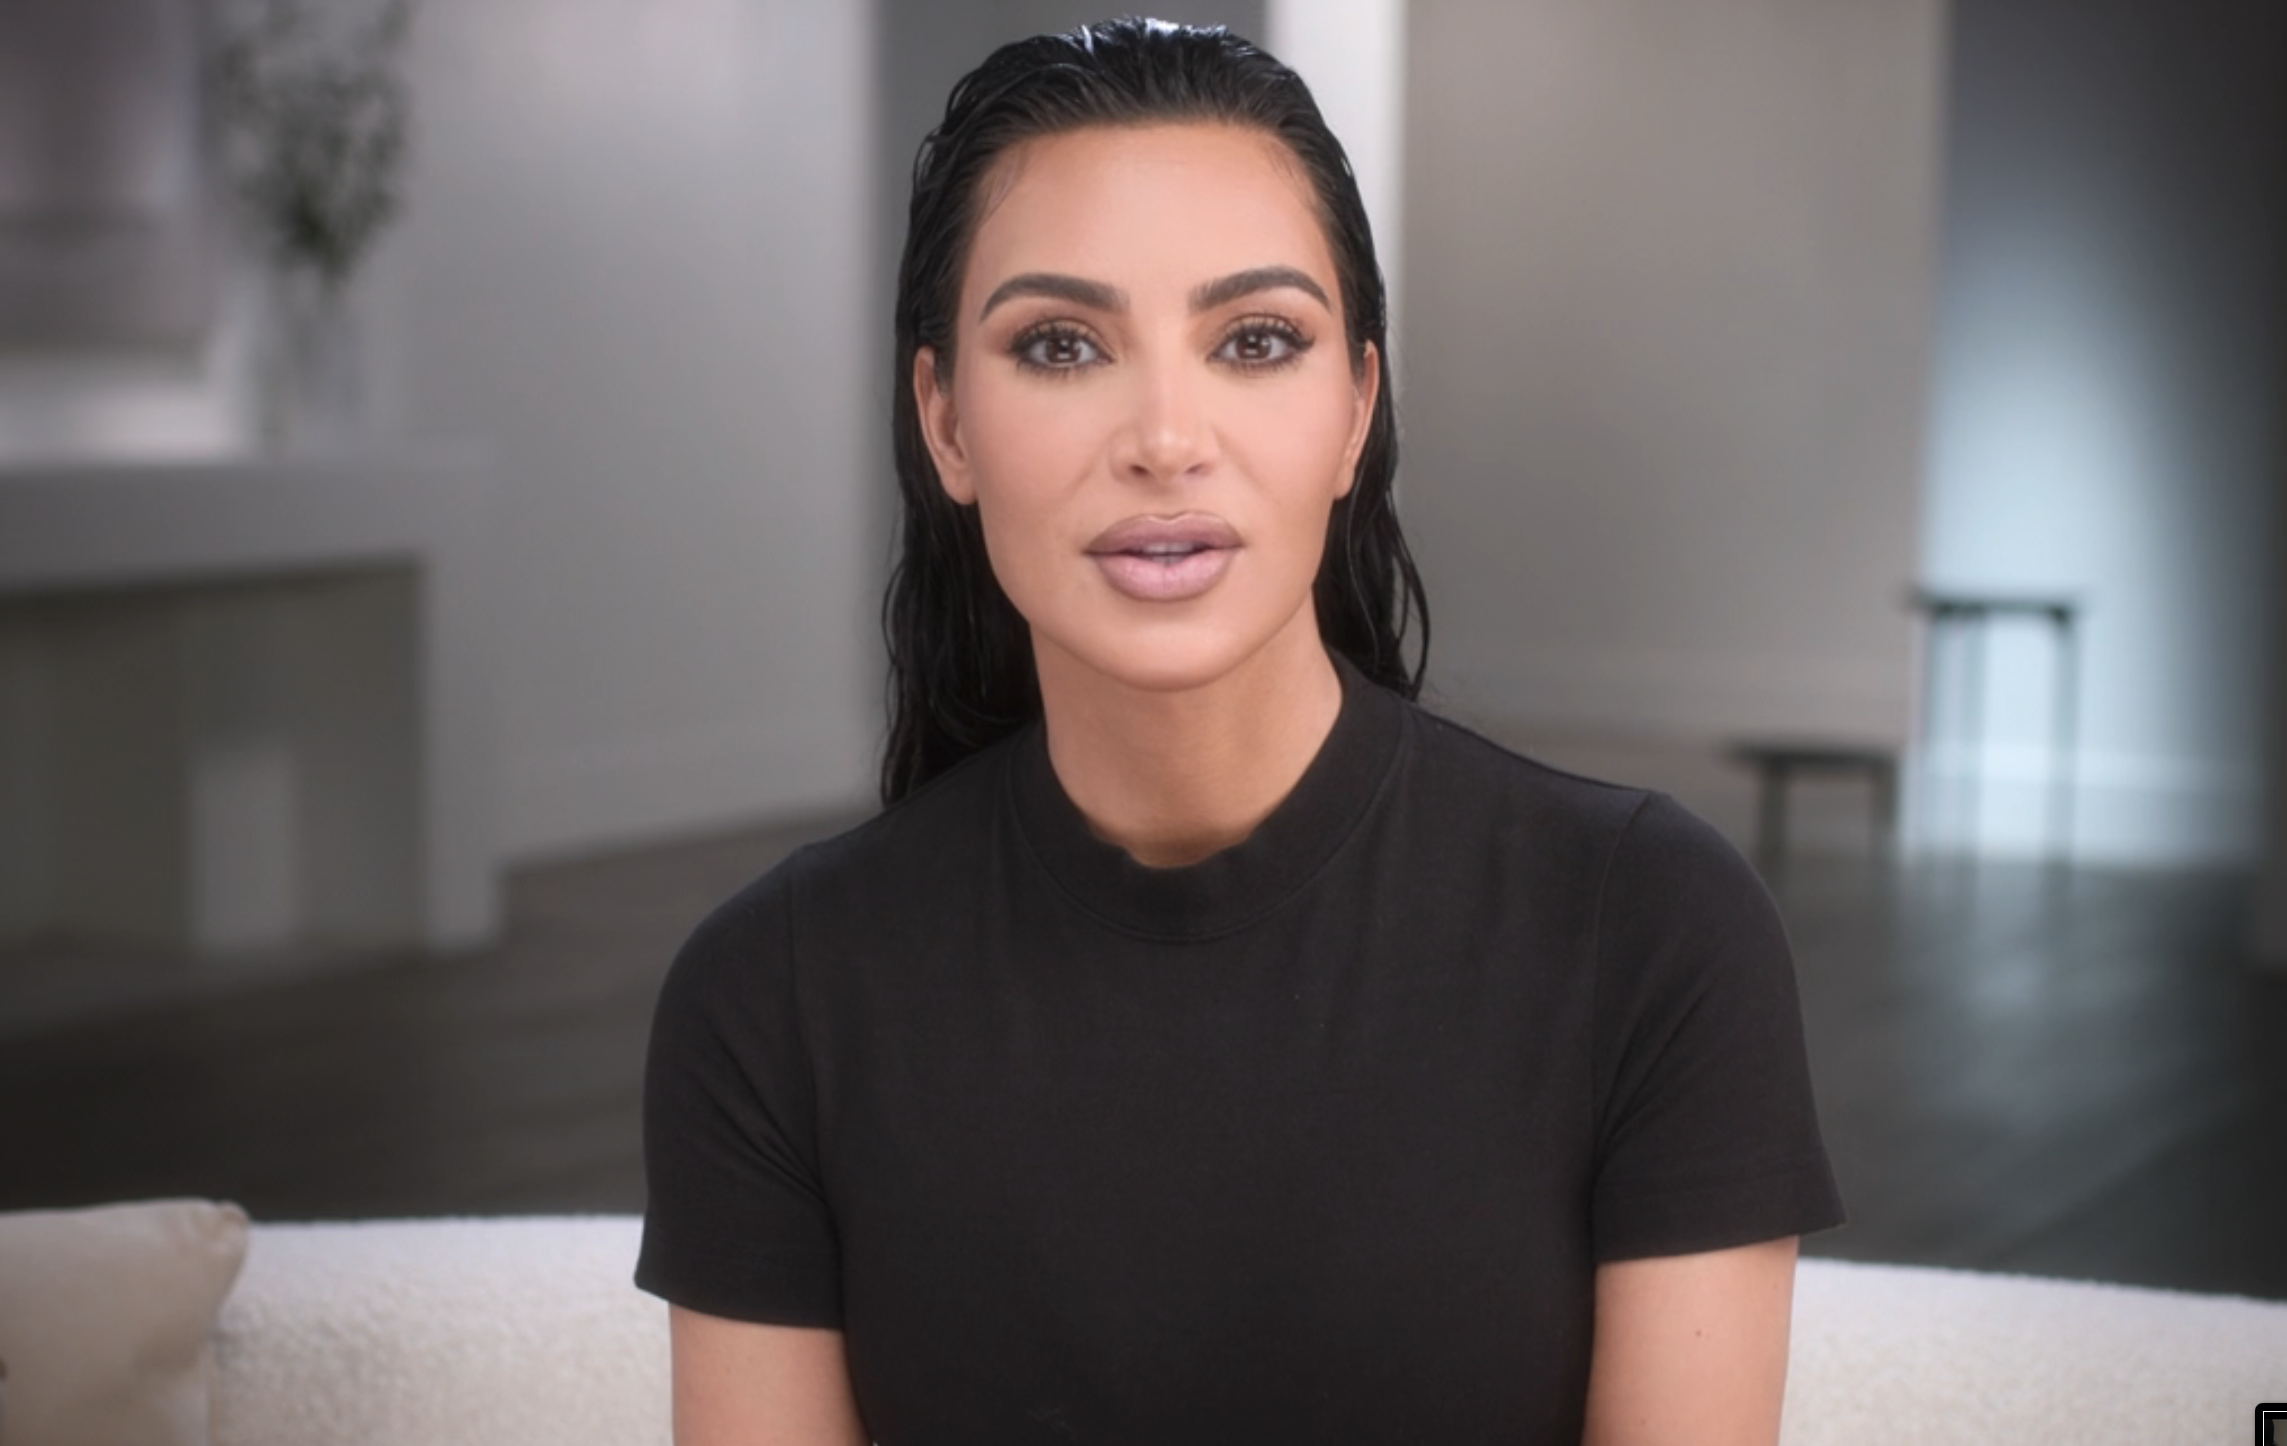 Kim Kardashian sits on a couch in a minimalistic room, wearing a simple black top, with slicked-back hair and natural makeup